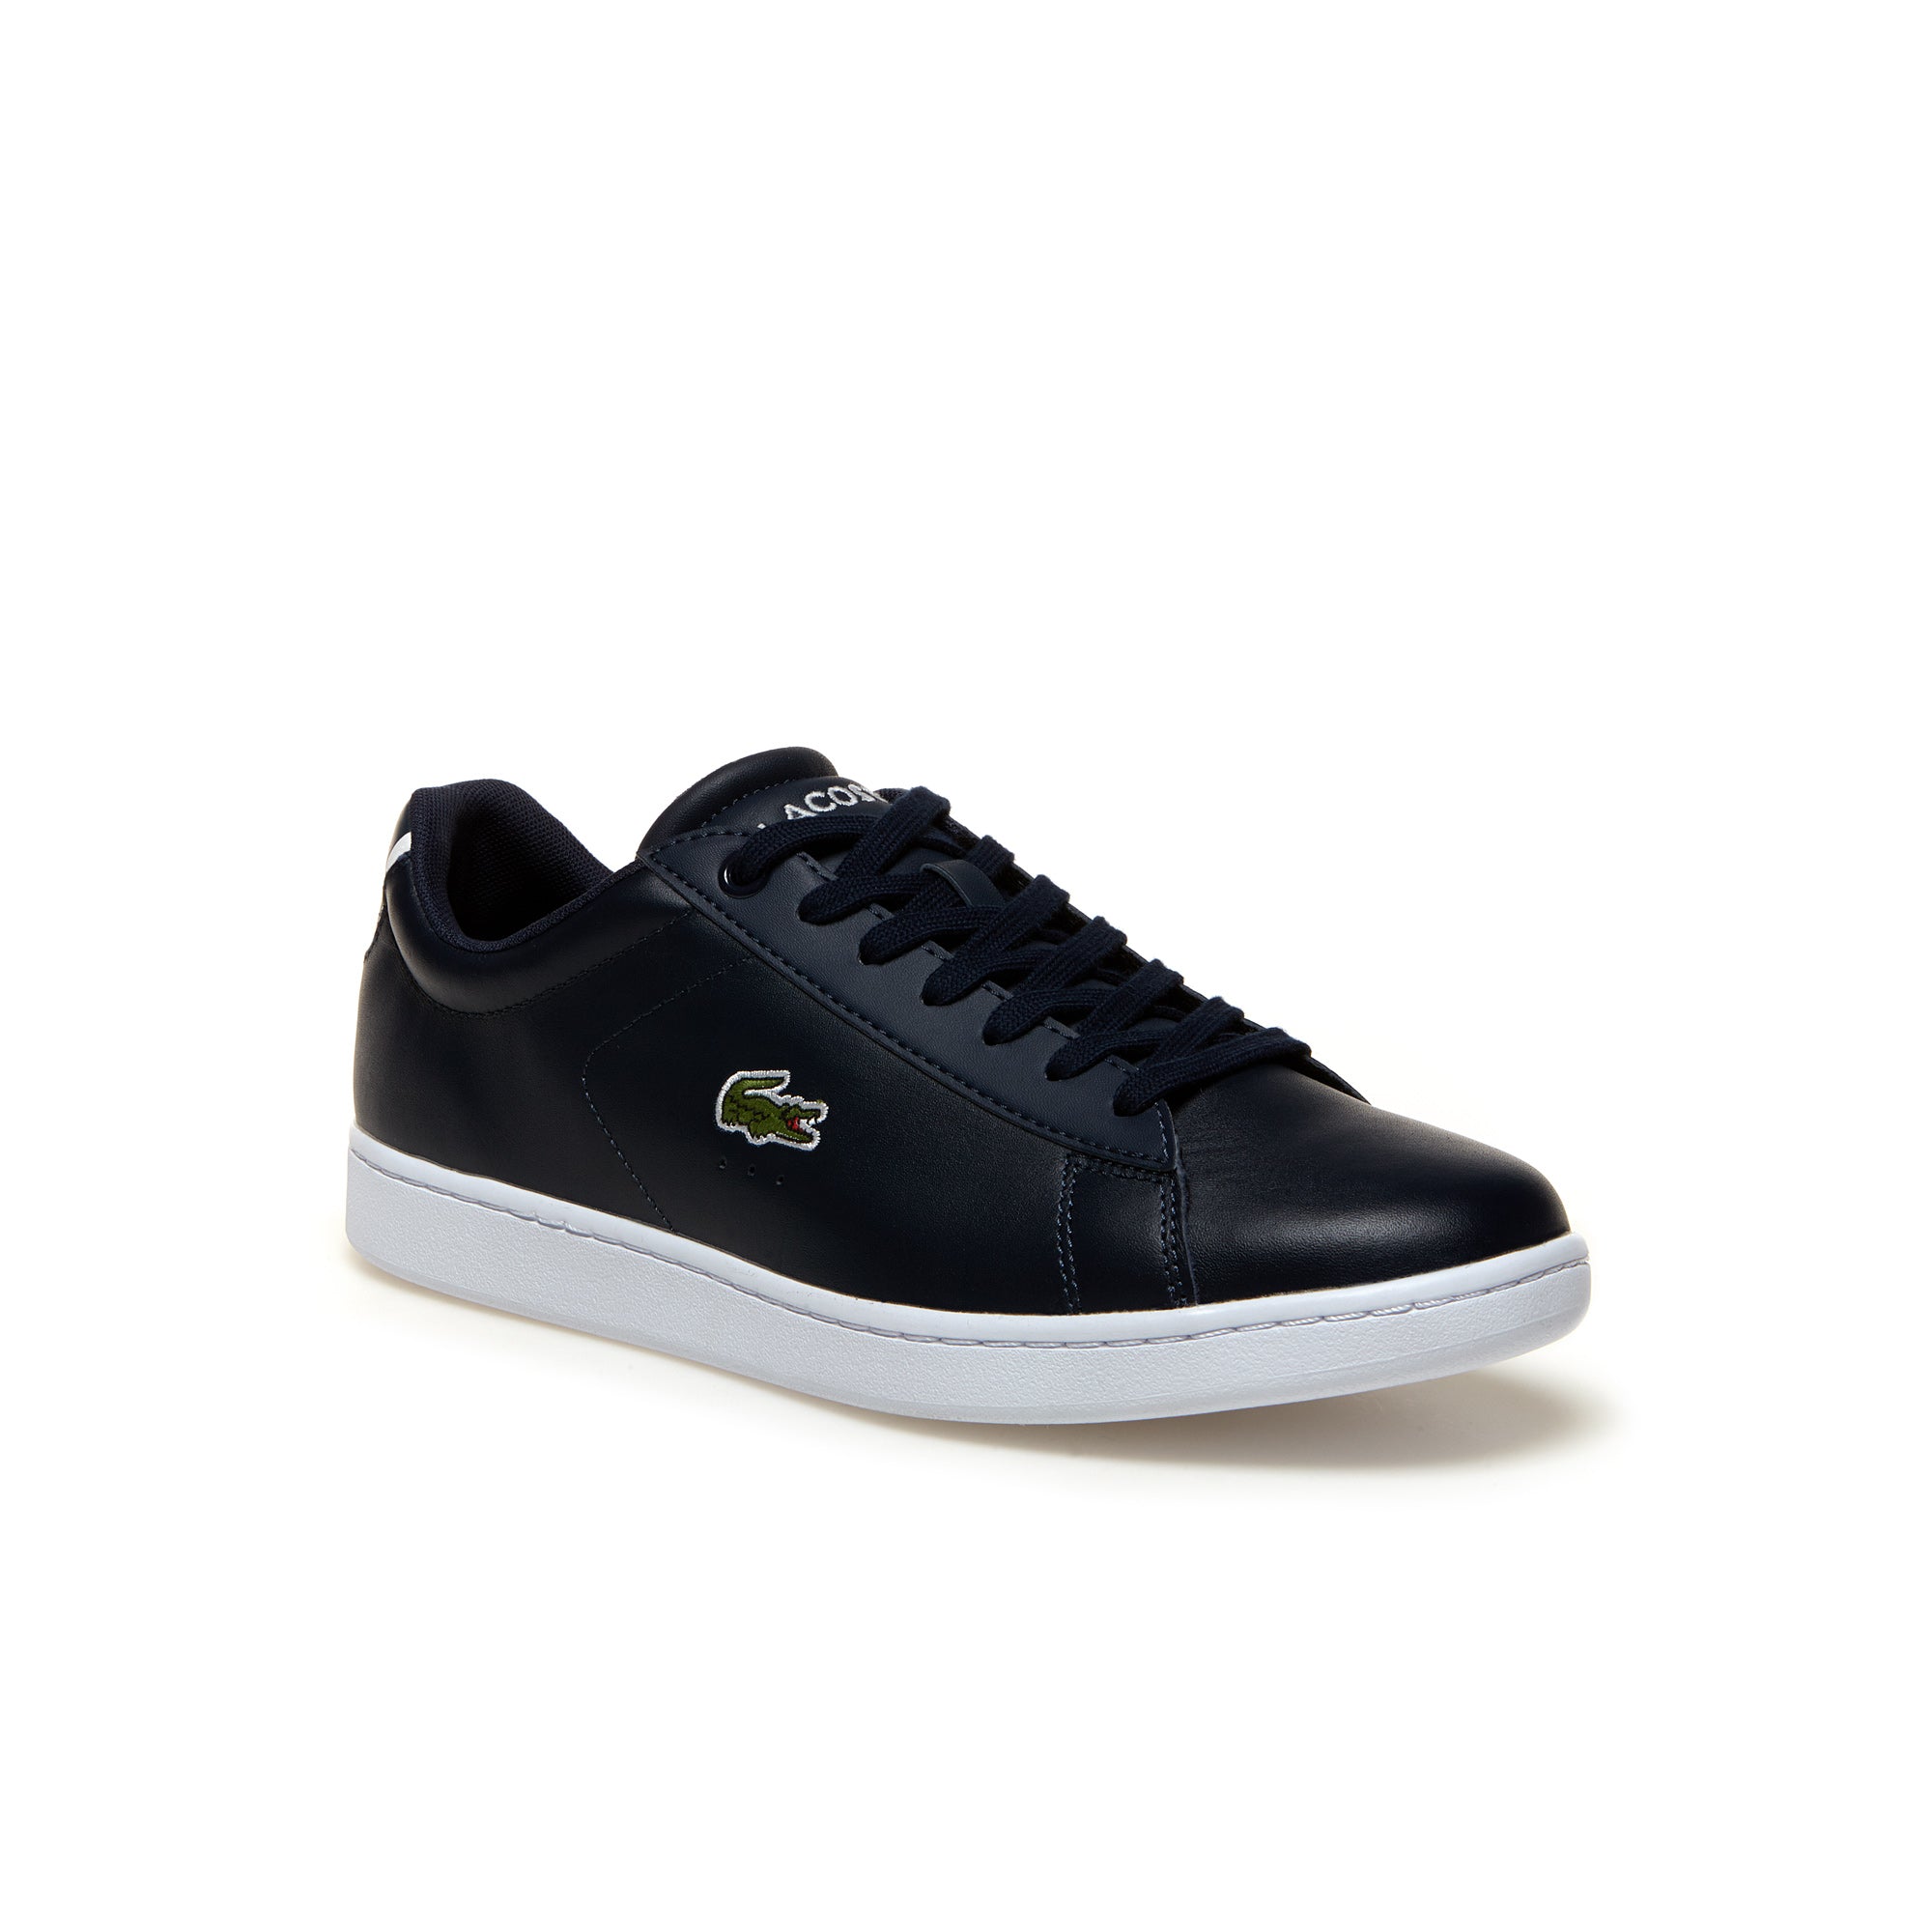 Men's Carnaby Evo BL Leather Sneakers 